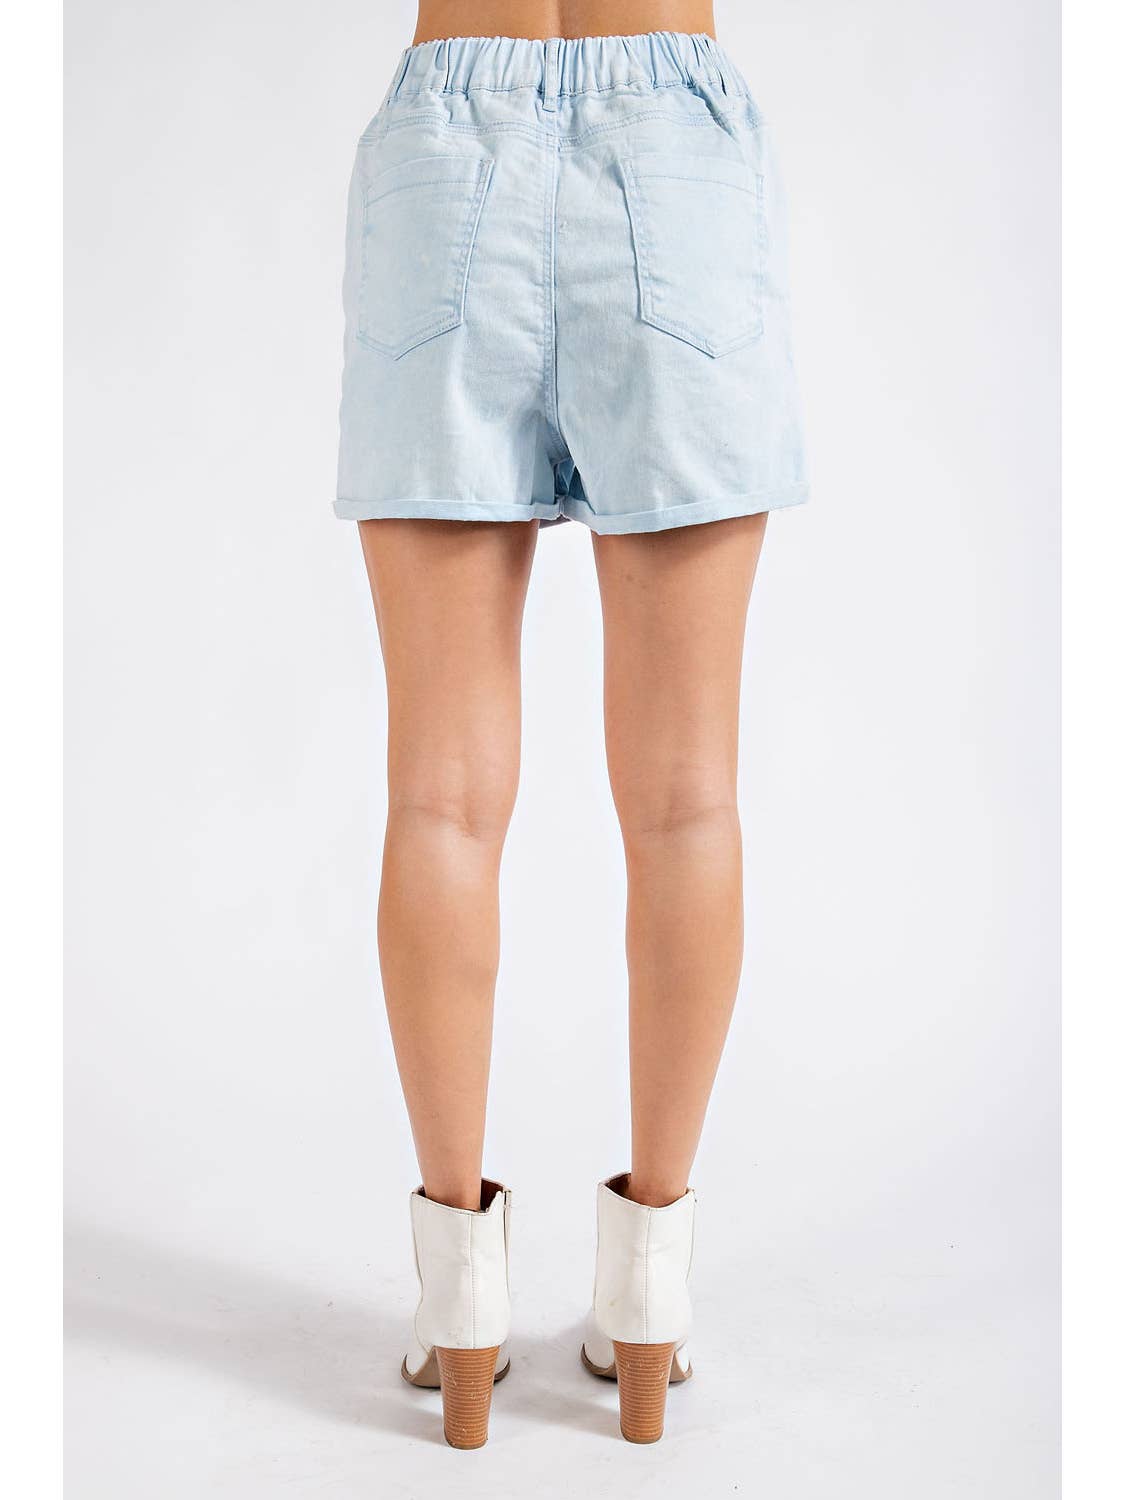 Paperbag Shorts - Storm and Sky Shoppe - 143 Story